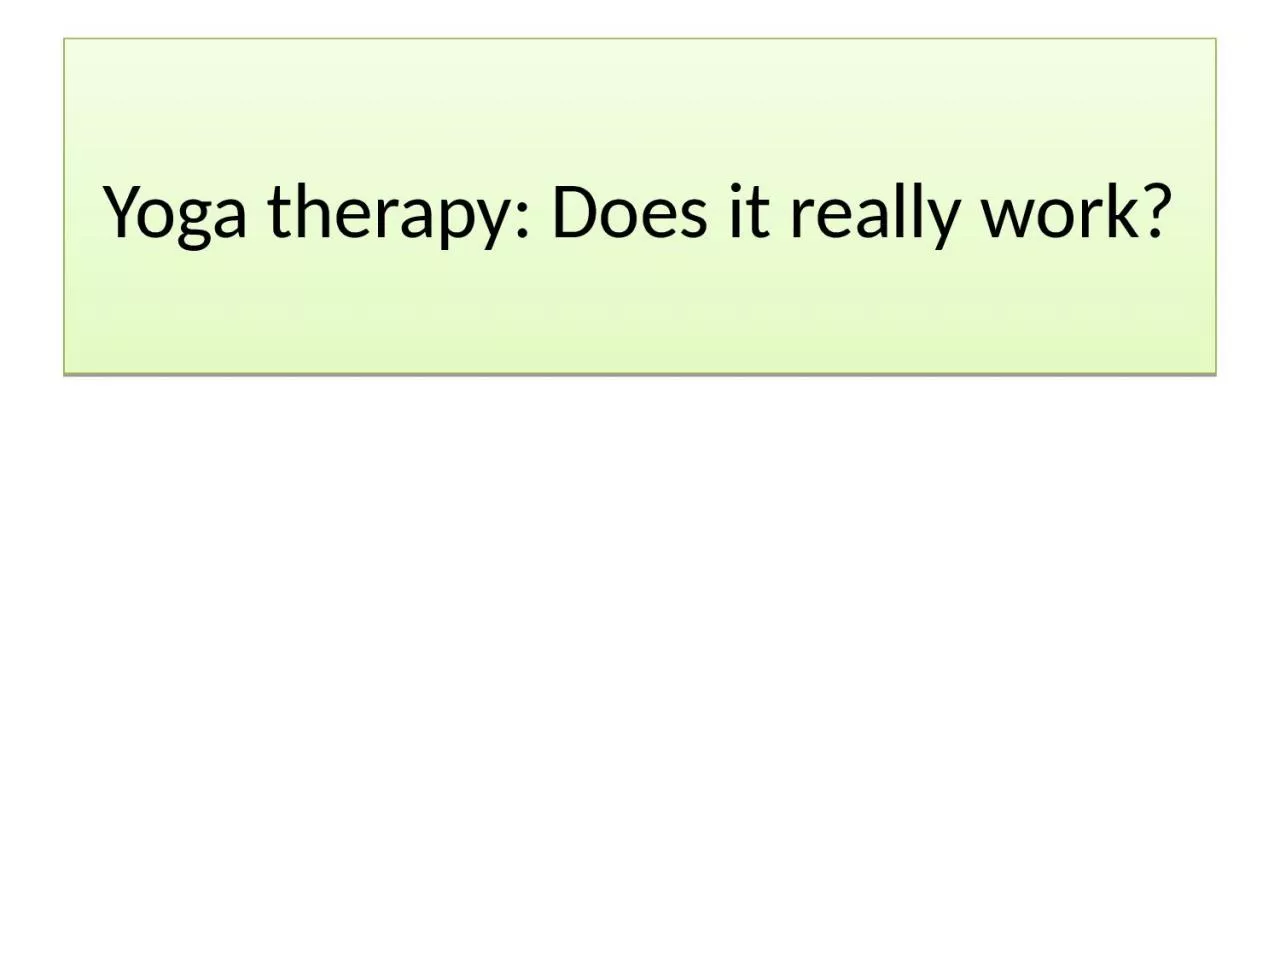 Yoga therapy: Does it really work?